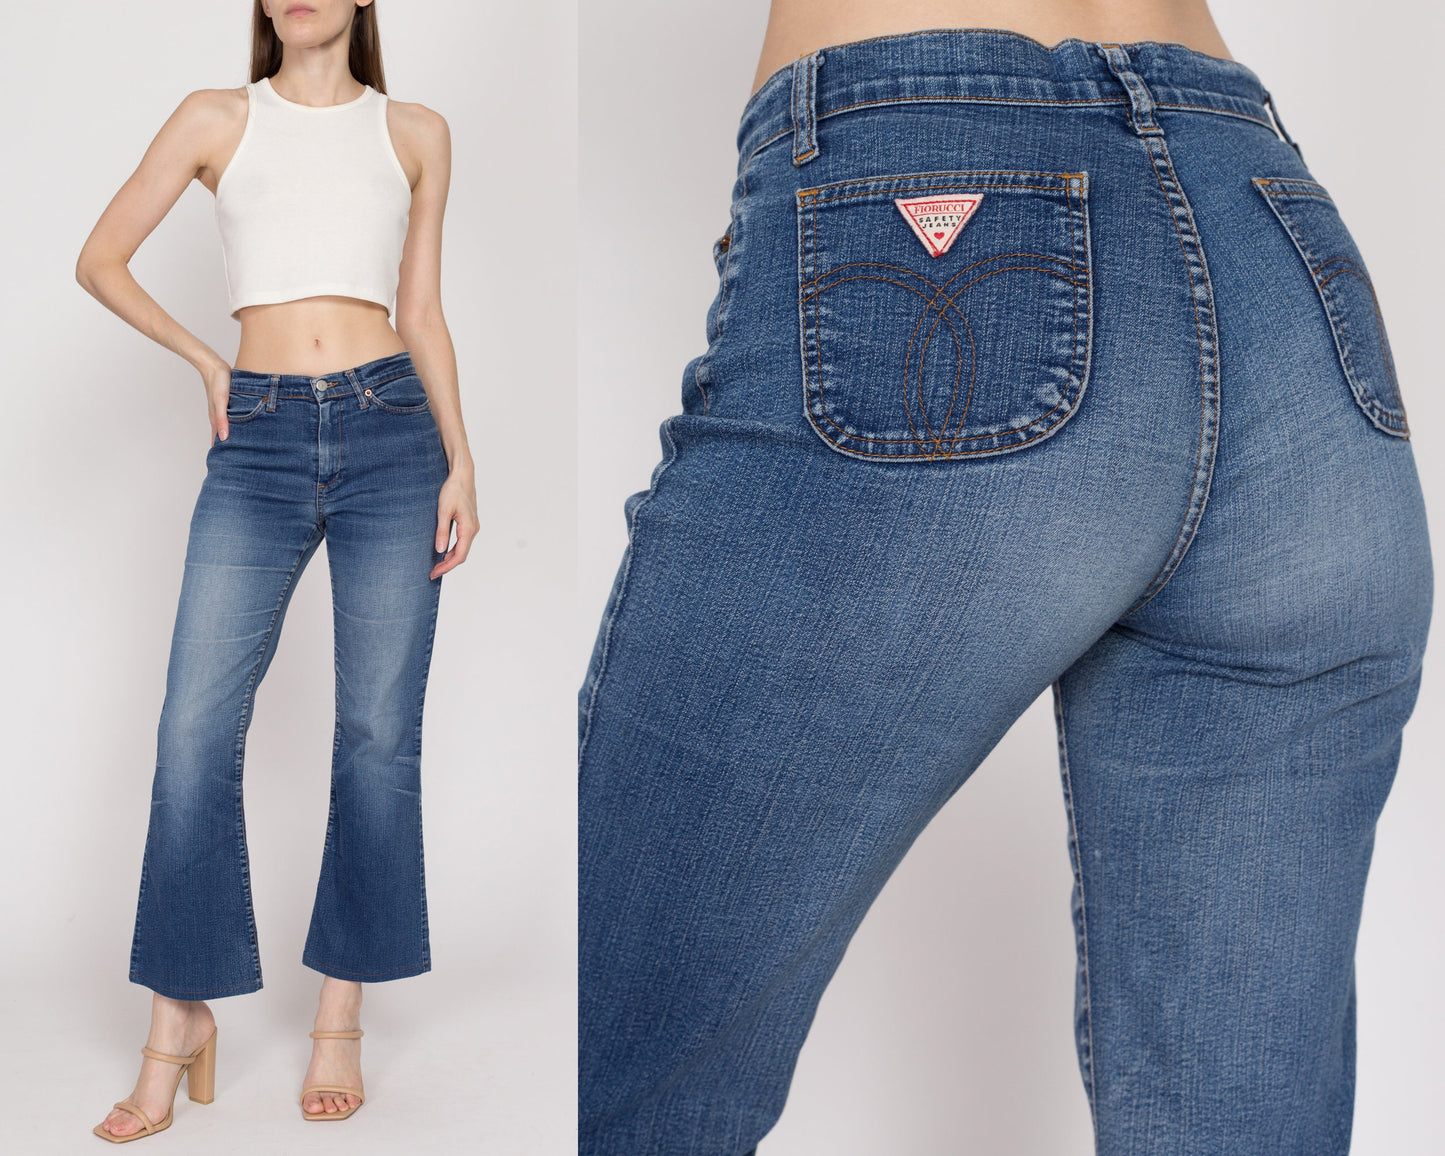 Small 90s Faded Mid Rise Flared Jeans | Vintage Denim Kick Flare Jeans